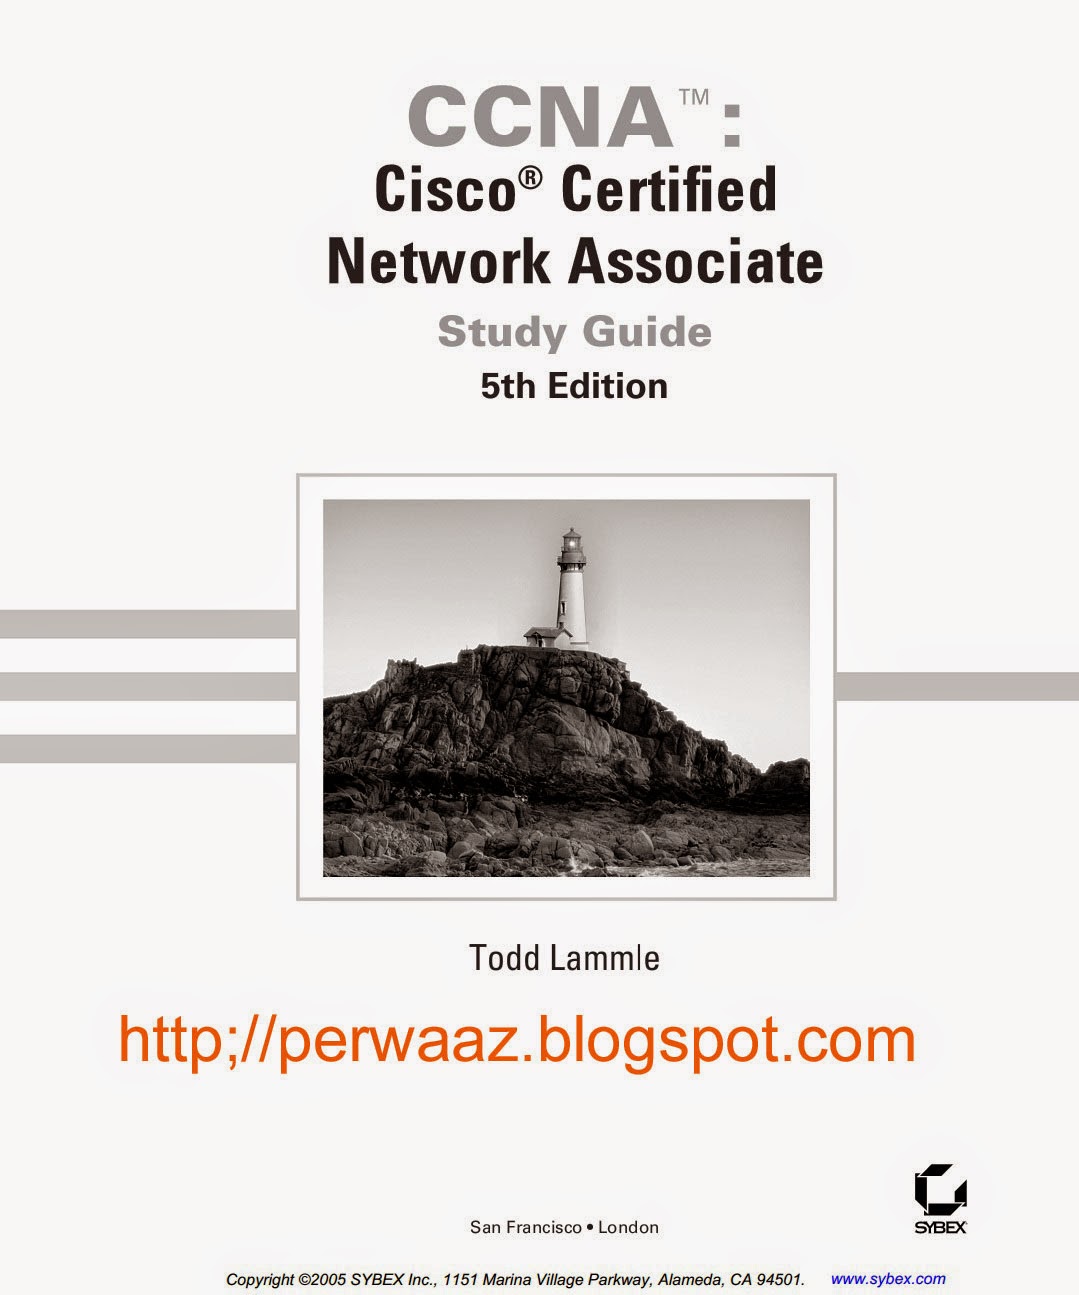 CCNA™ Cisco® Certified Network Associate Study Guide 5th Edition